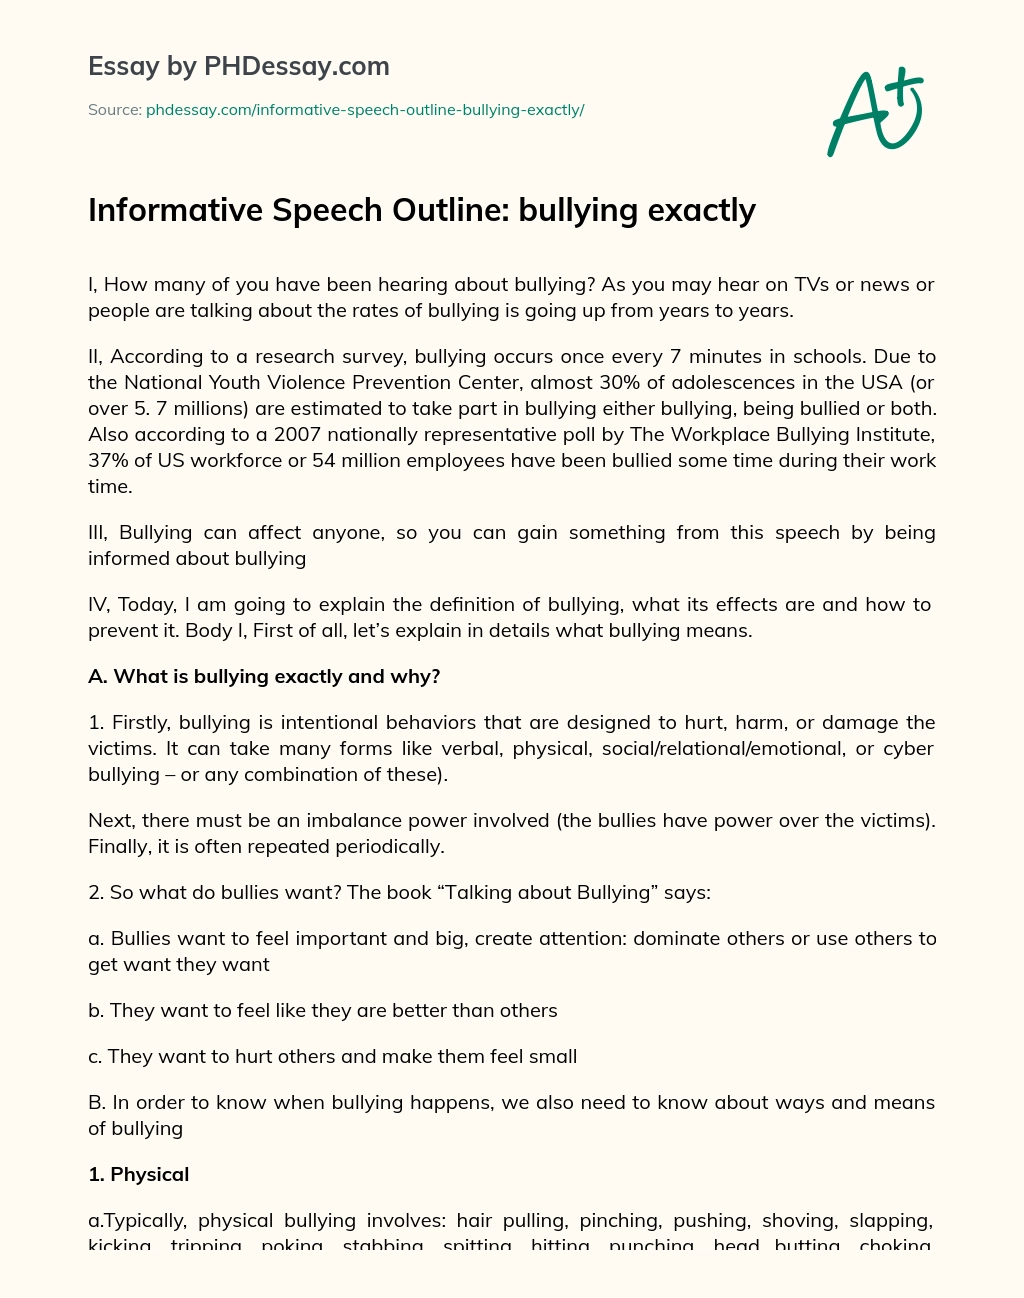 Informative Speech Outline: bullying exactly essay